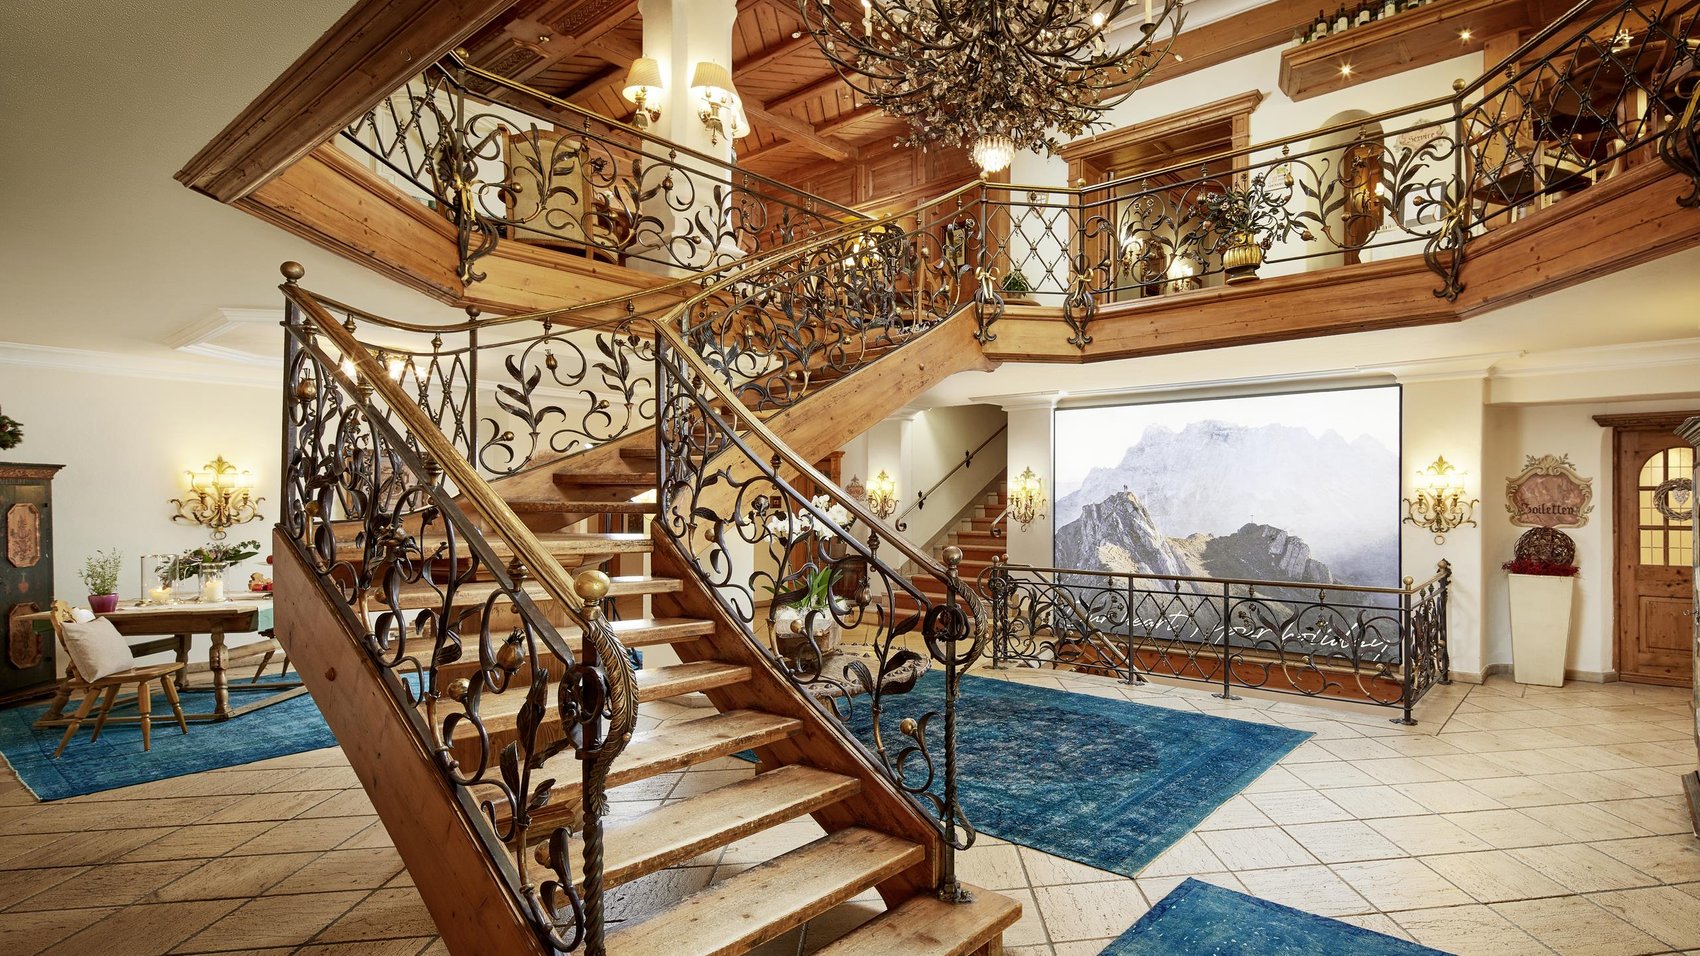 Are you looking for a 4-star hotel in Tyrol?